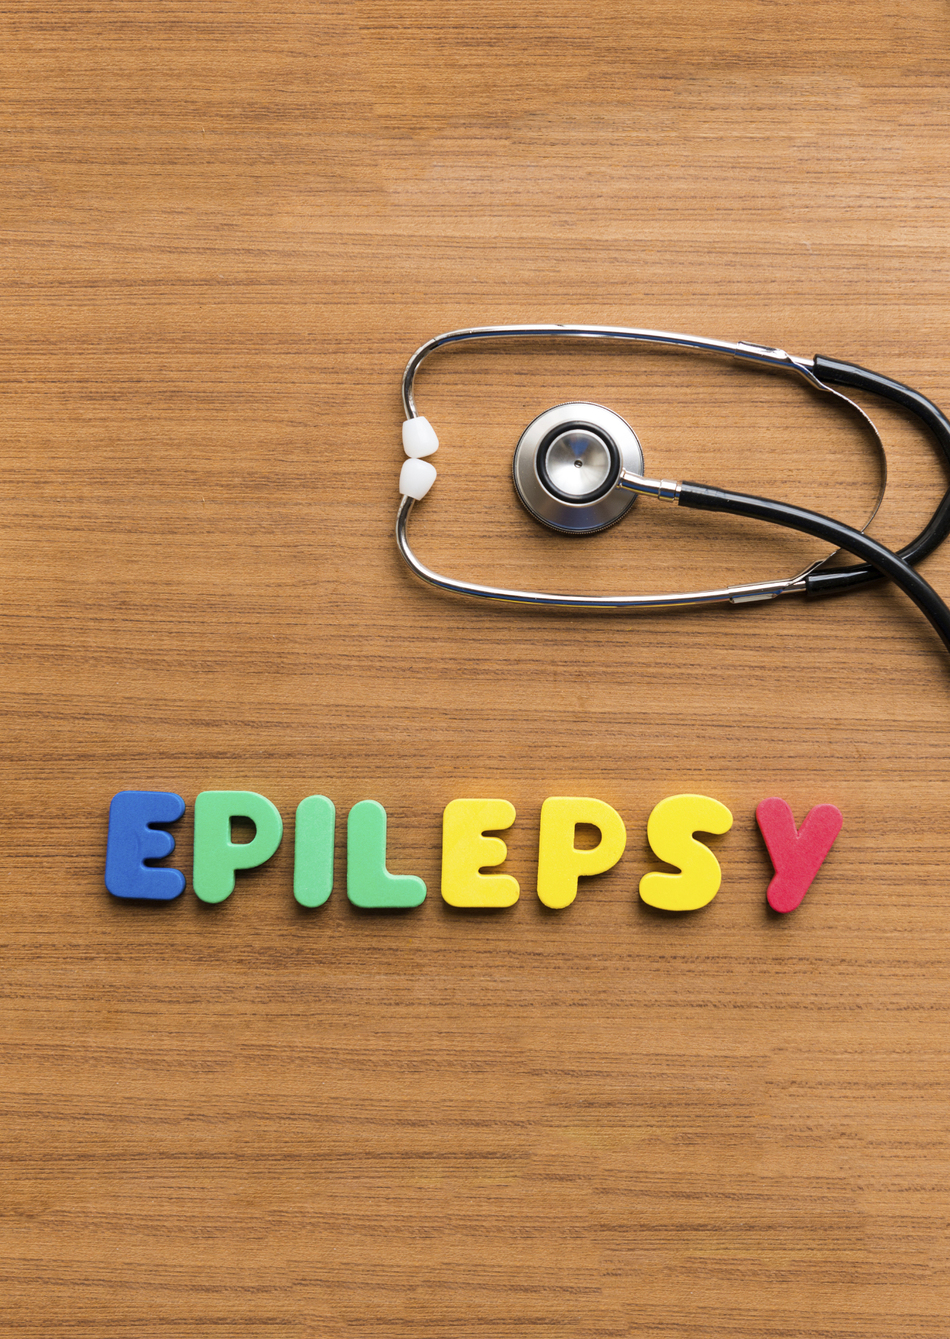 Frustrating Epilepsy Case? Here Are Your Options